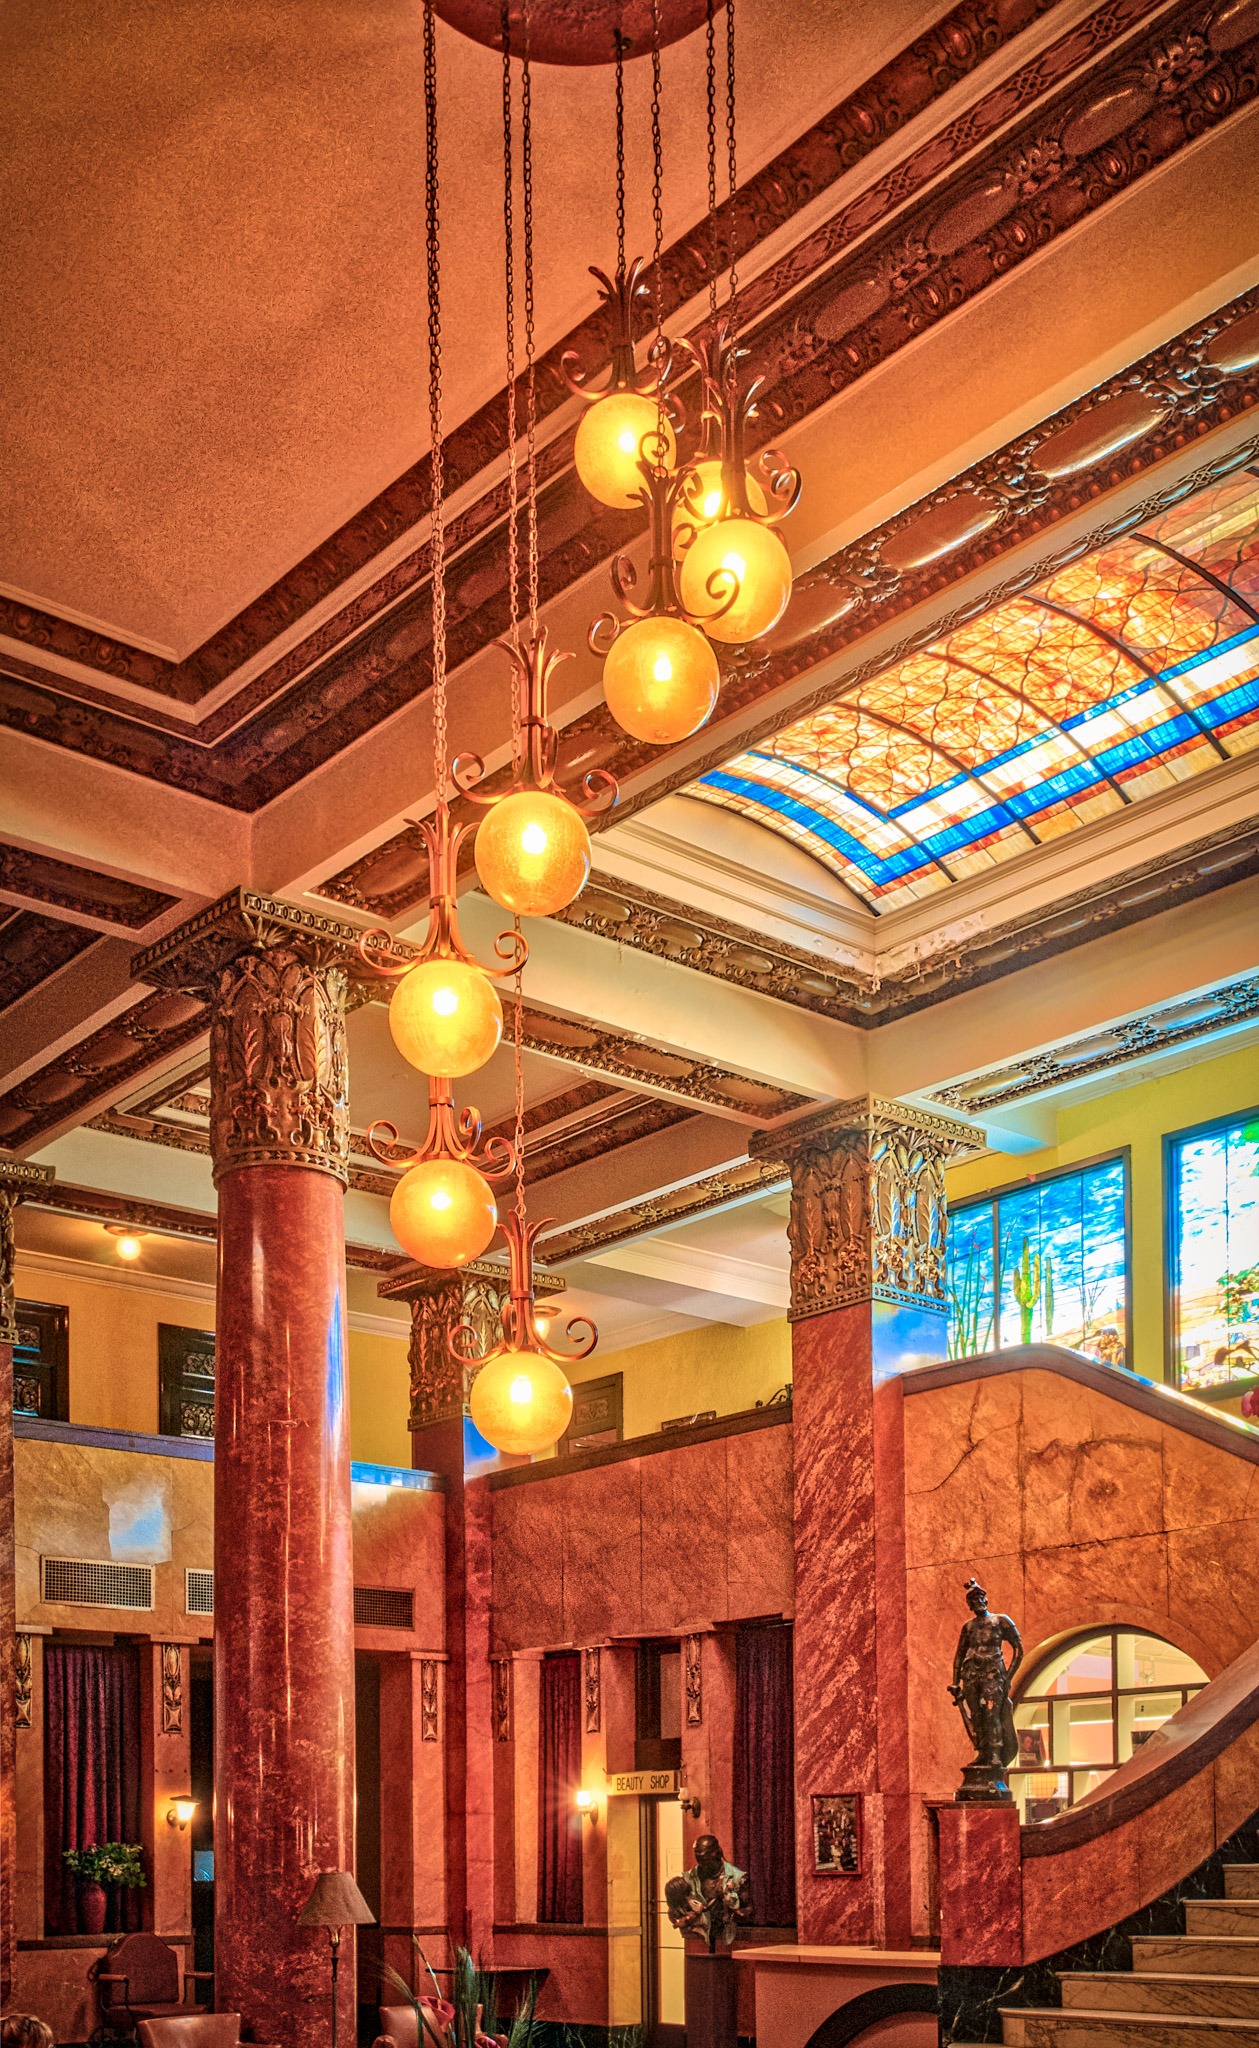 A view of the grand Hotel Gadsden lobby highlighting the leather furniture, tile floors, Italian marble, stained glass, and expansive grand staircase. Notice the spiral central chandelier.